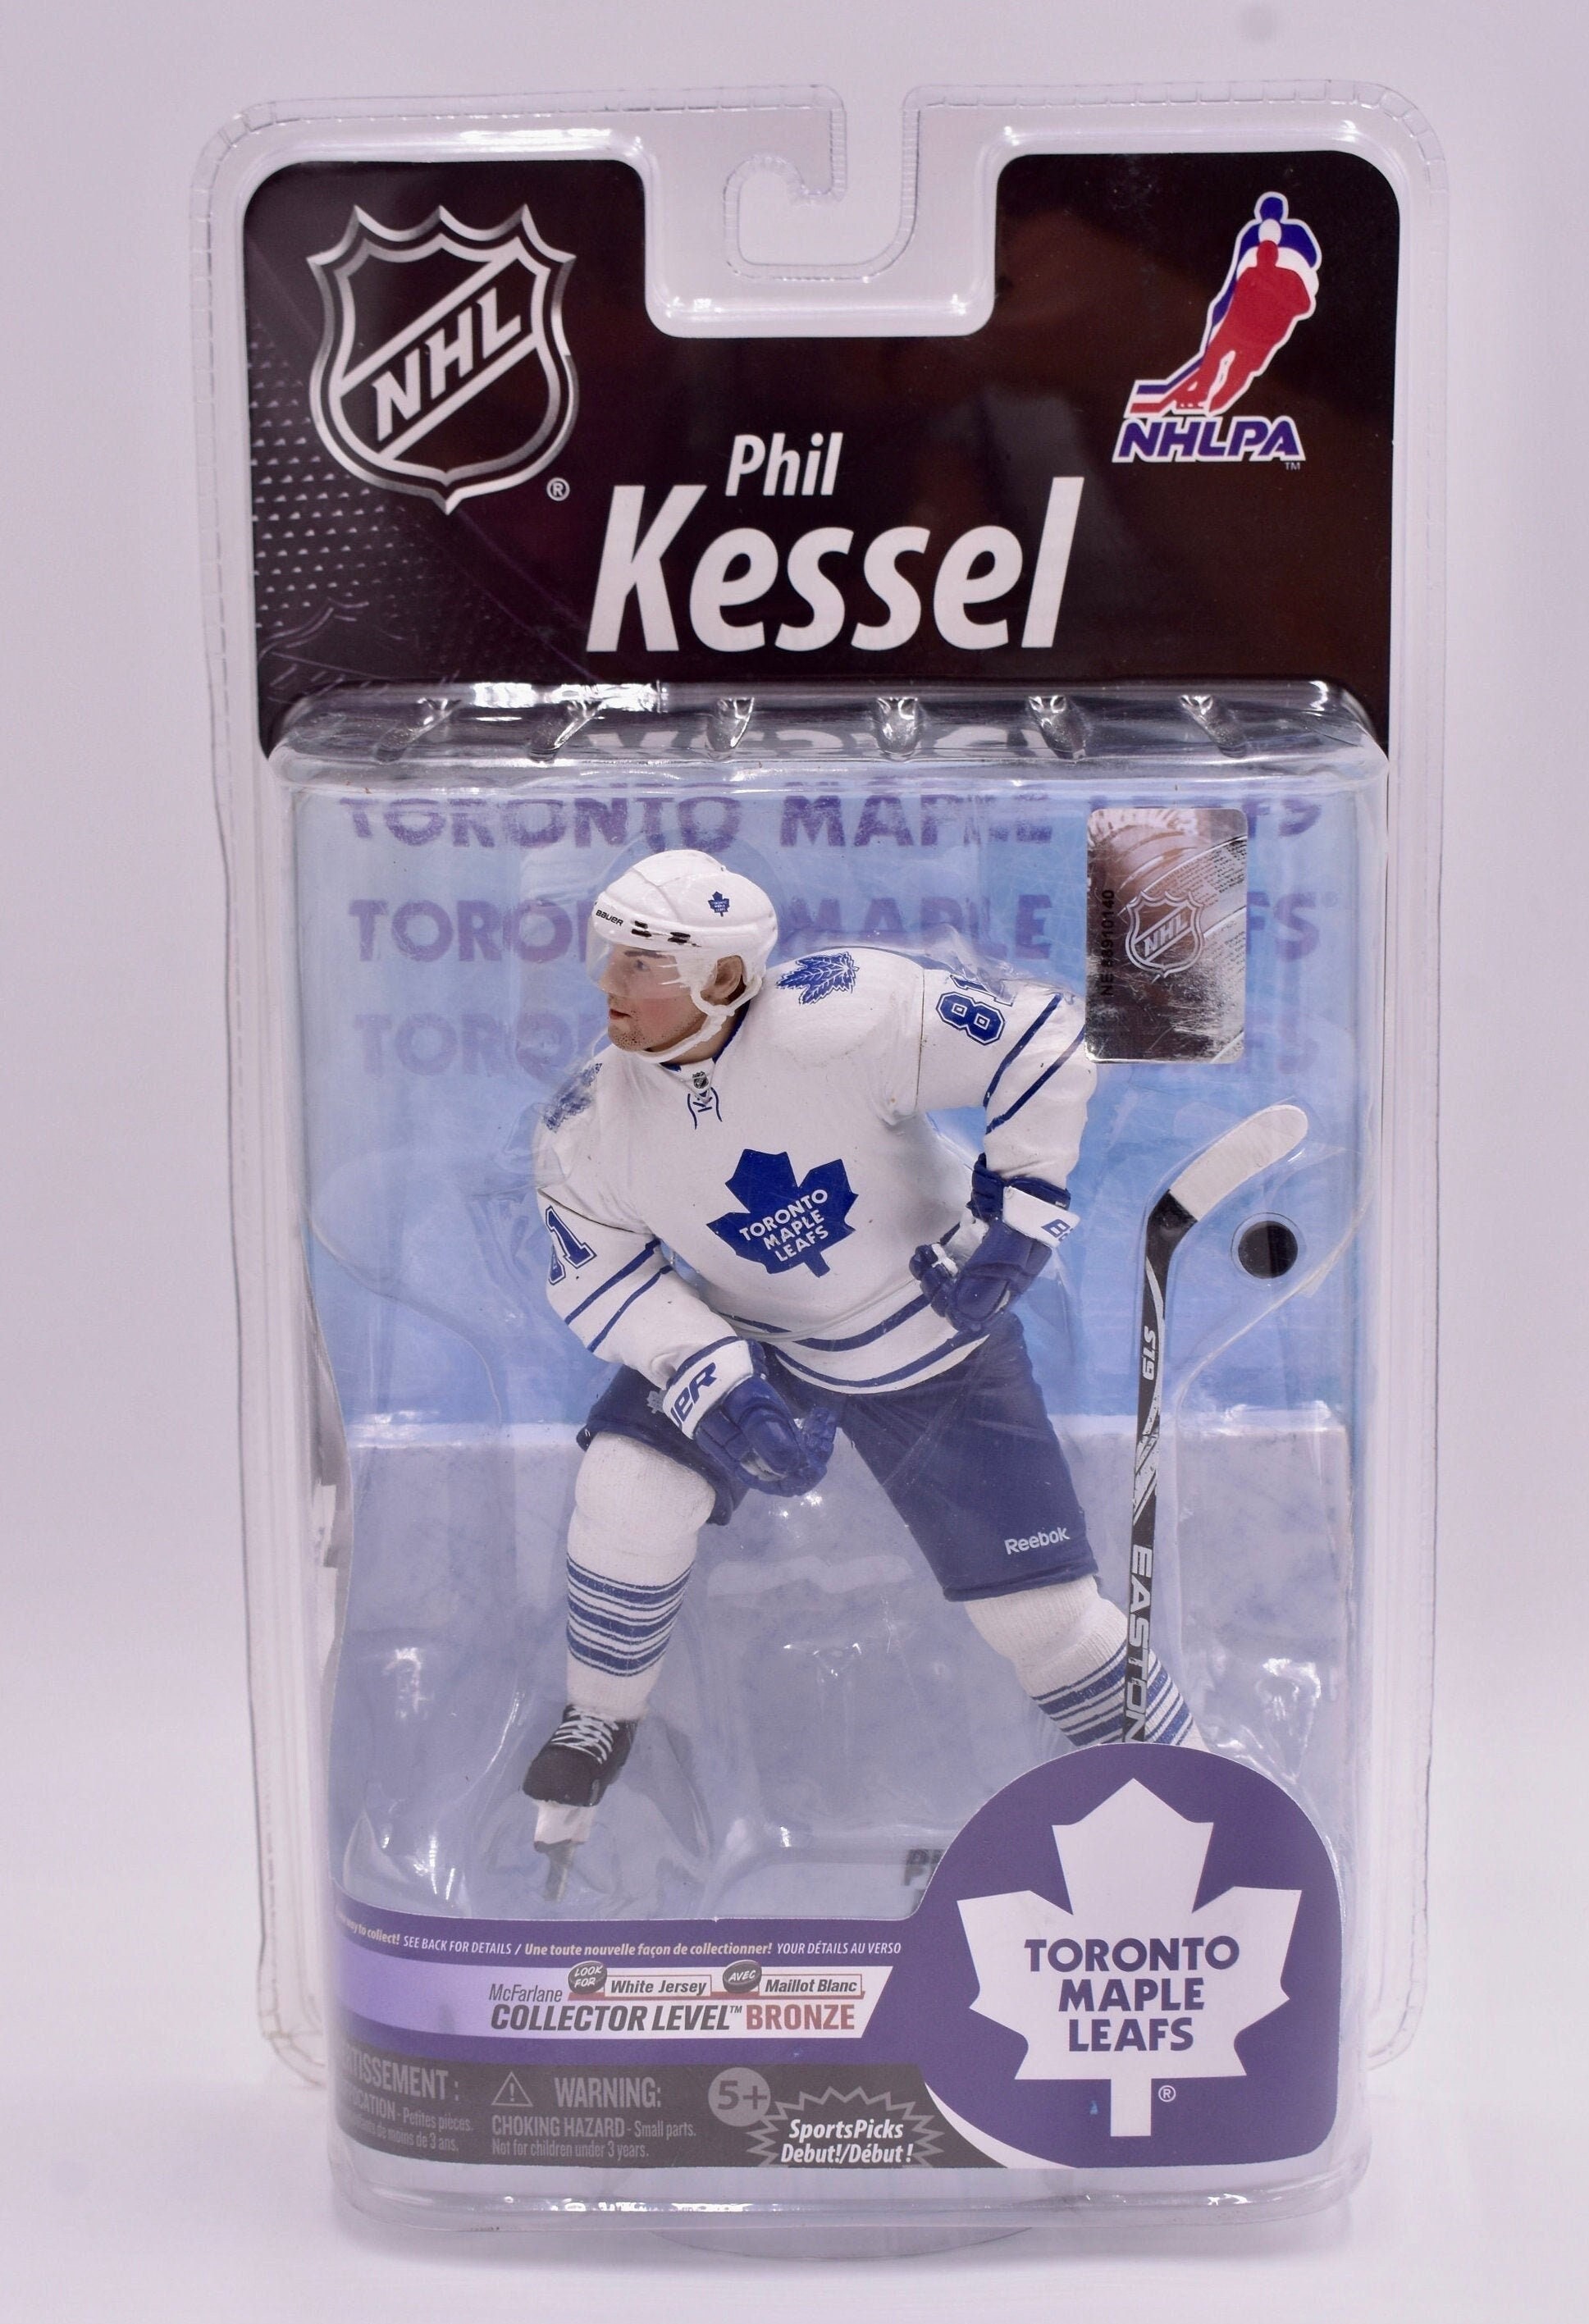 Youth Small Toronto Maple Leafs Phil Kessel Jersey 